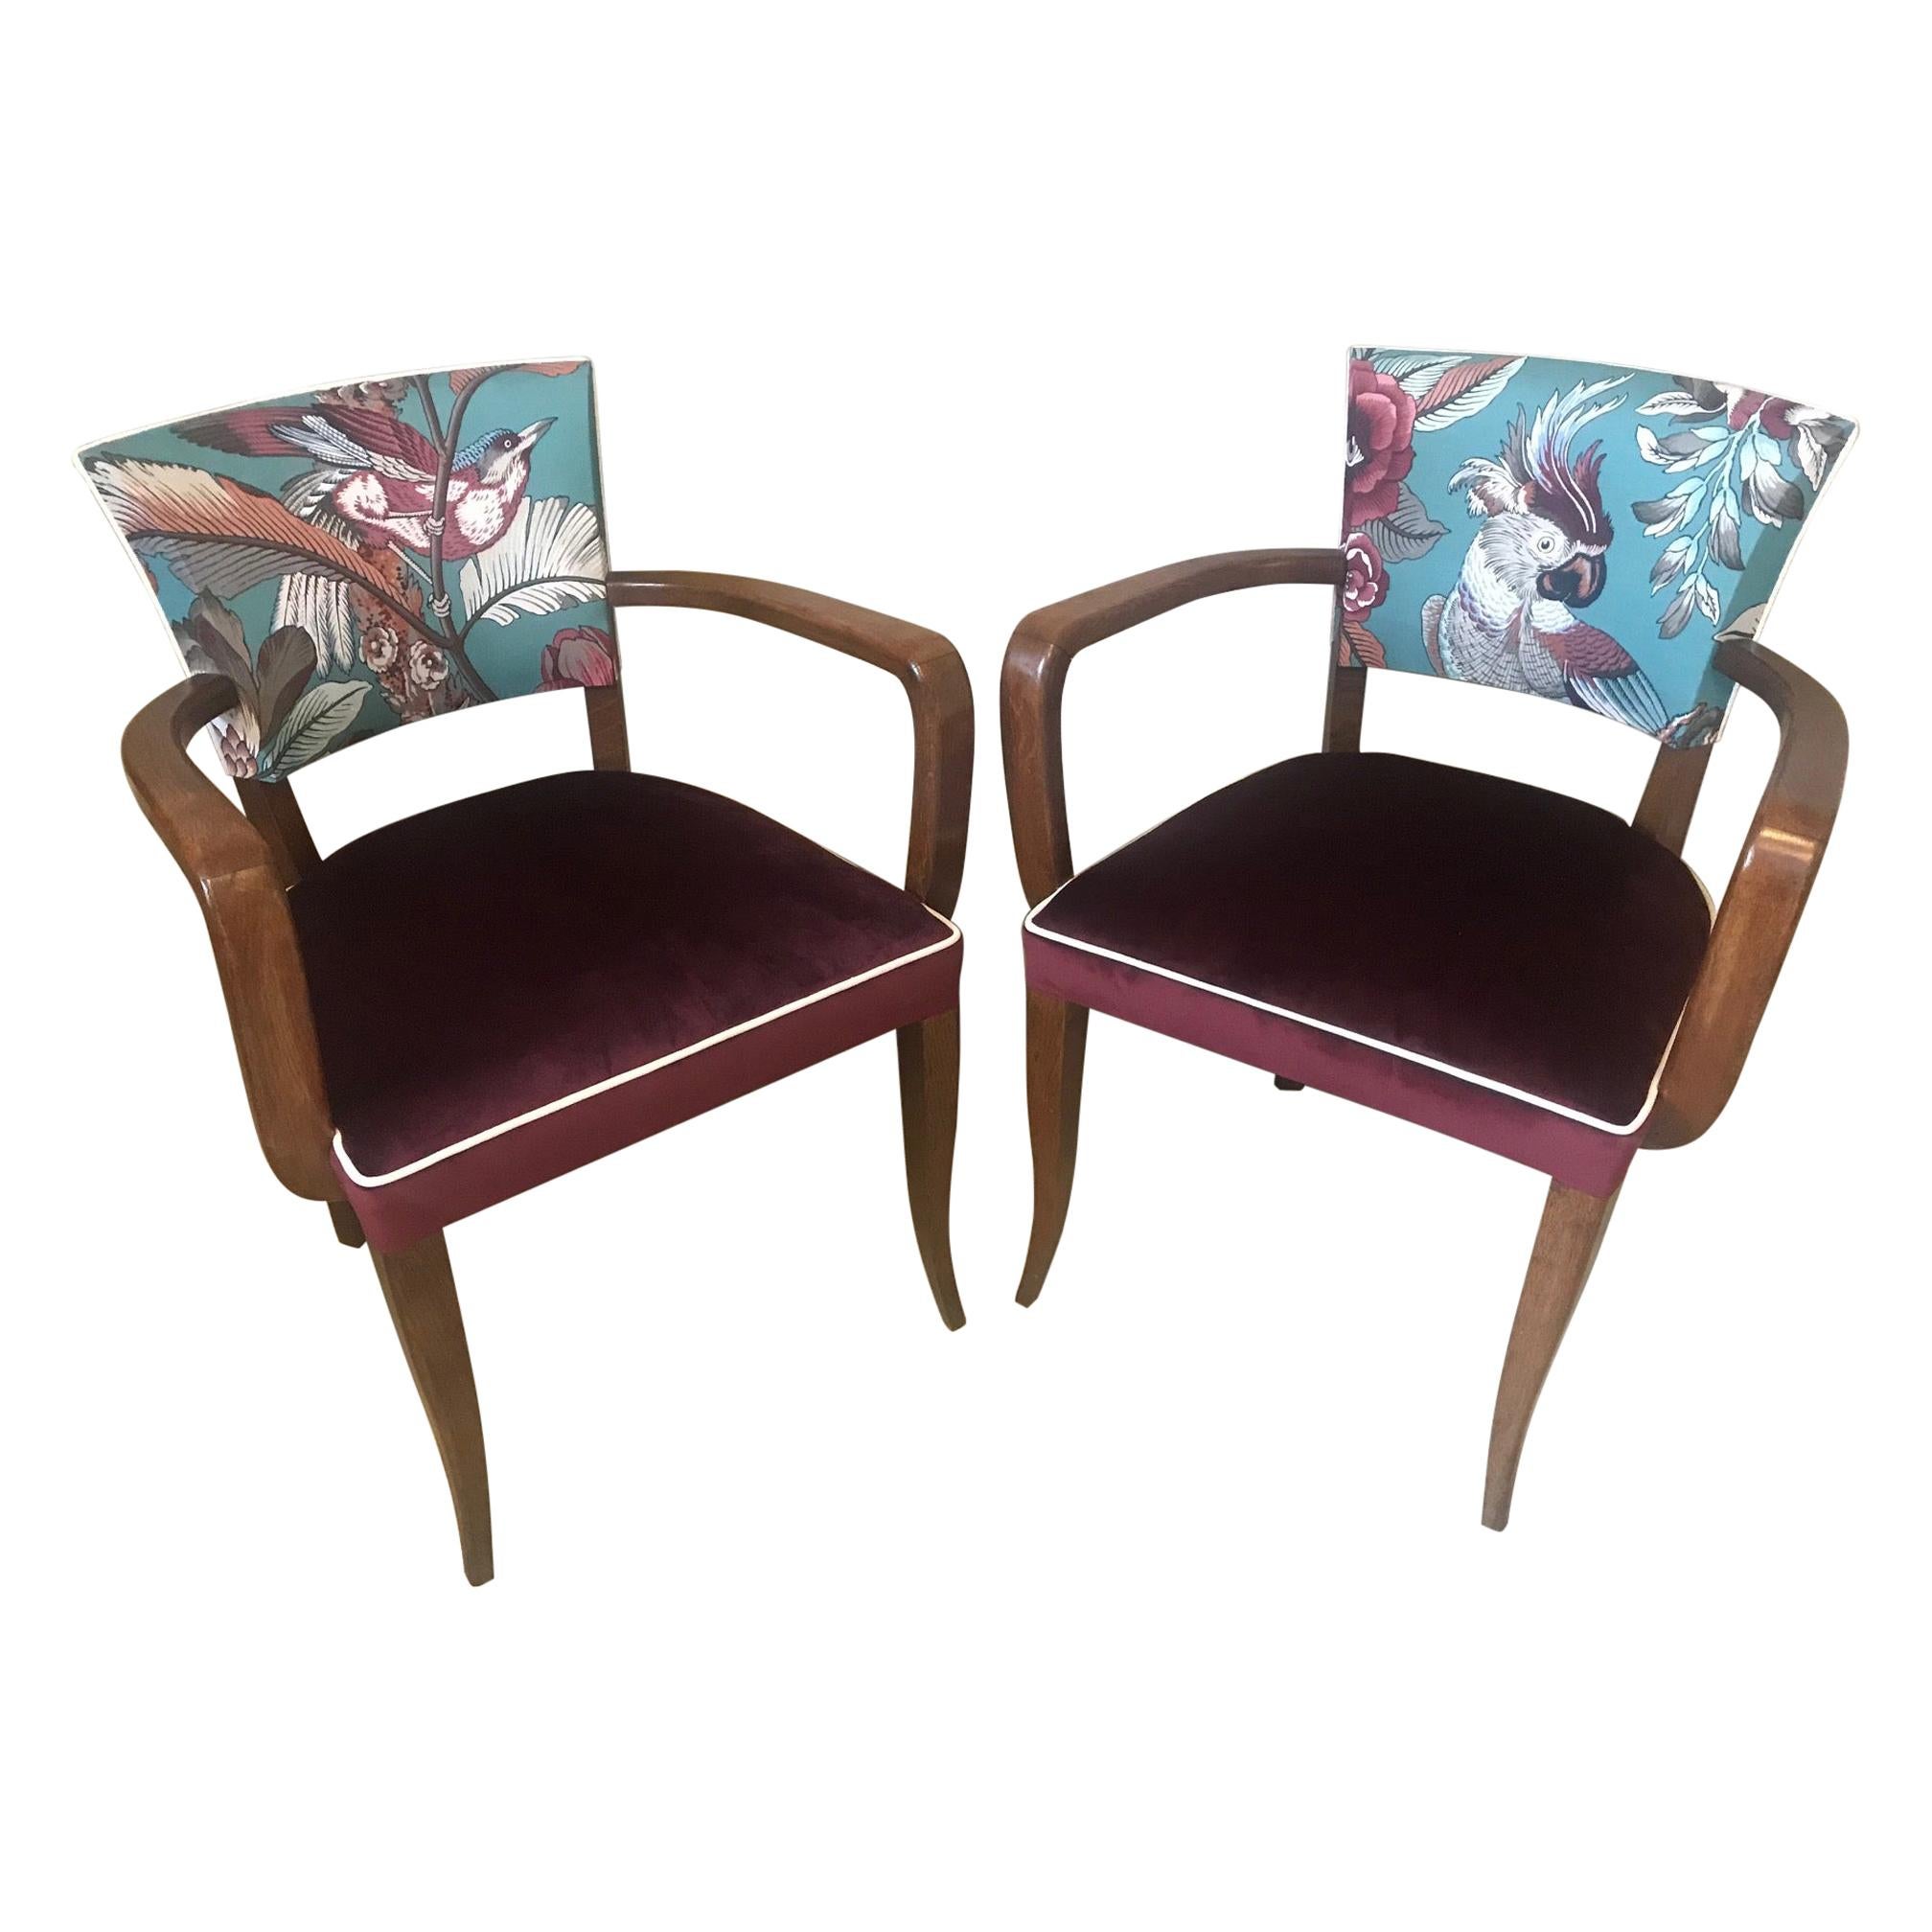 20th Century French Pair of Reupholstered Armchair, 1920s